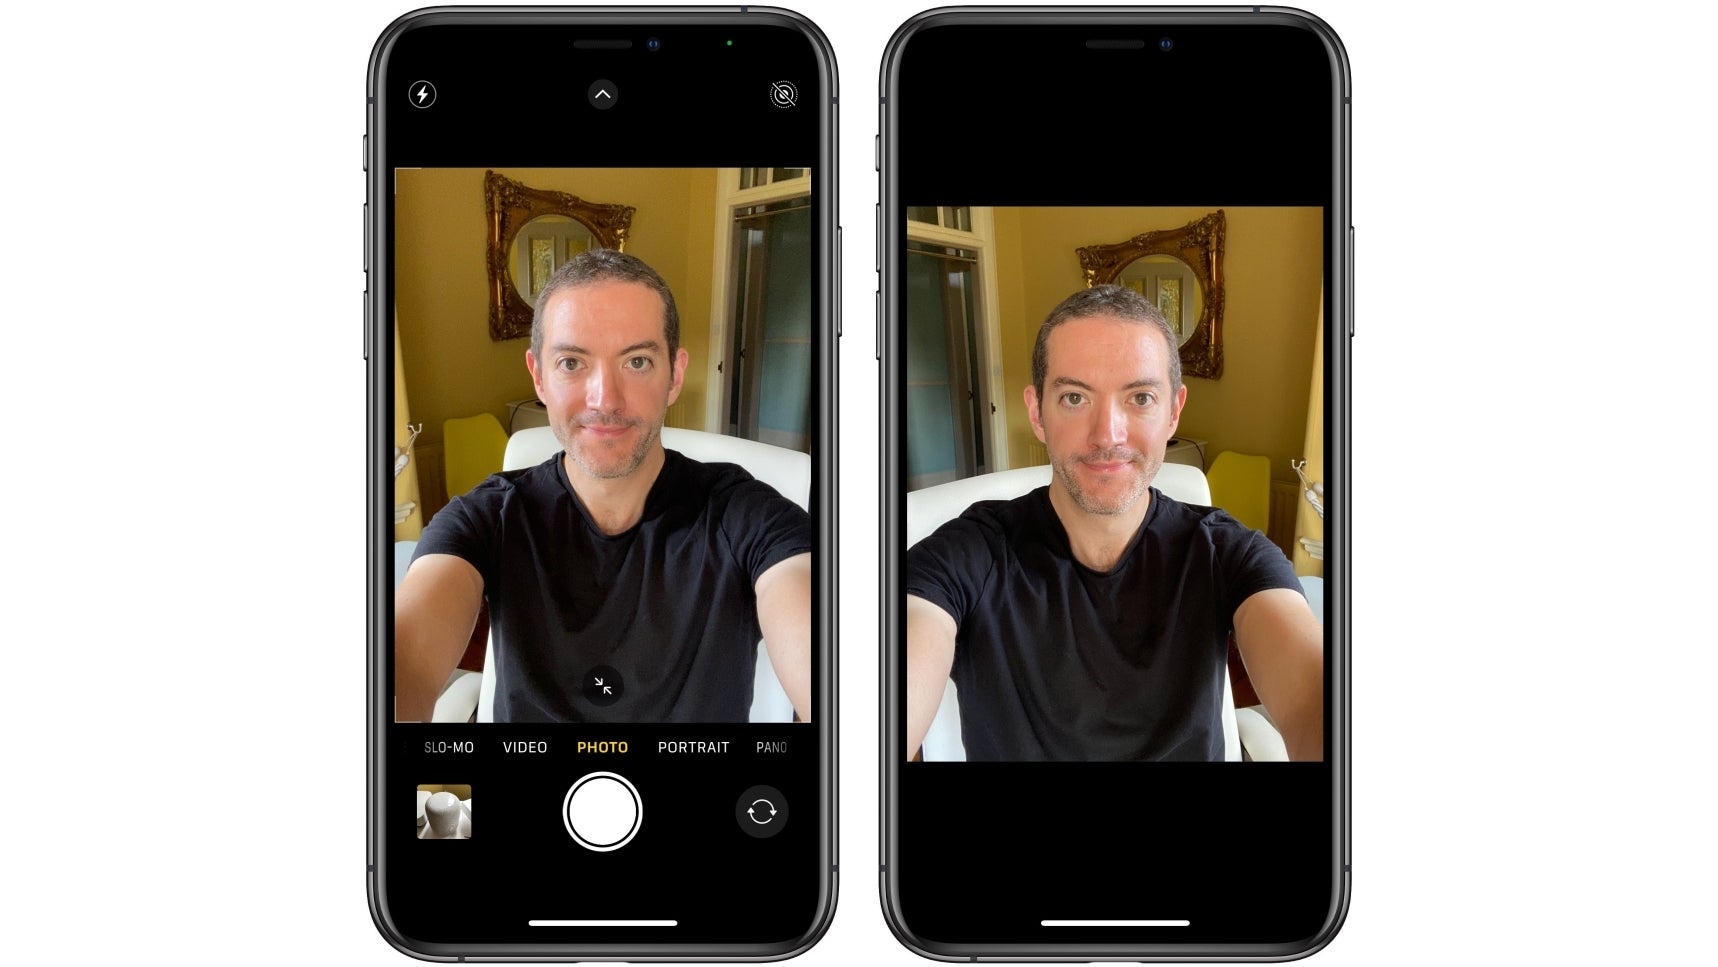 Mirrored selfies can look better because your brain thinks so! - Taking photos with iPhone will never be the same: 5 game-changing camera tricks you need now!